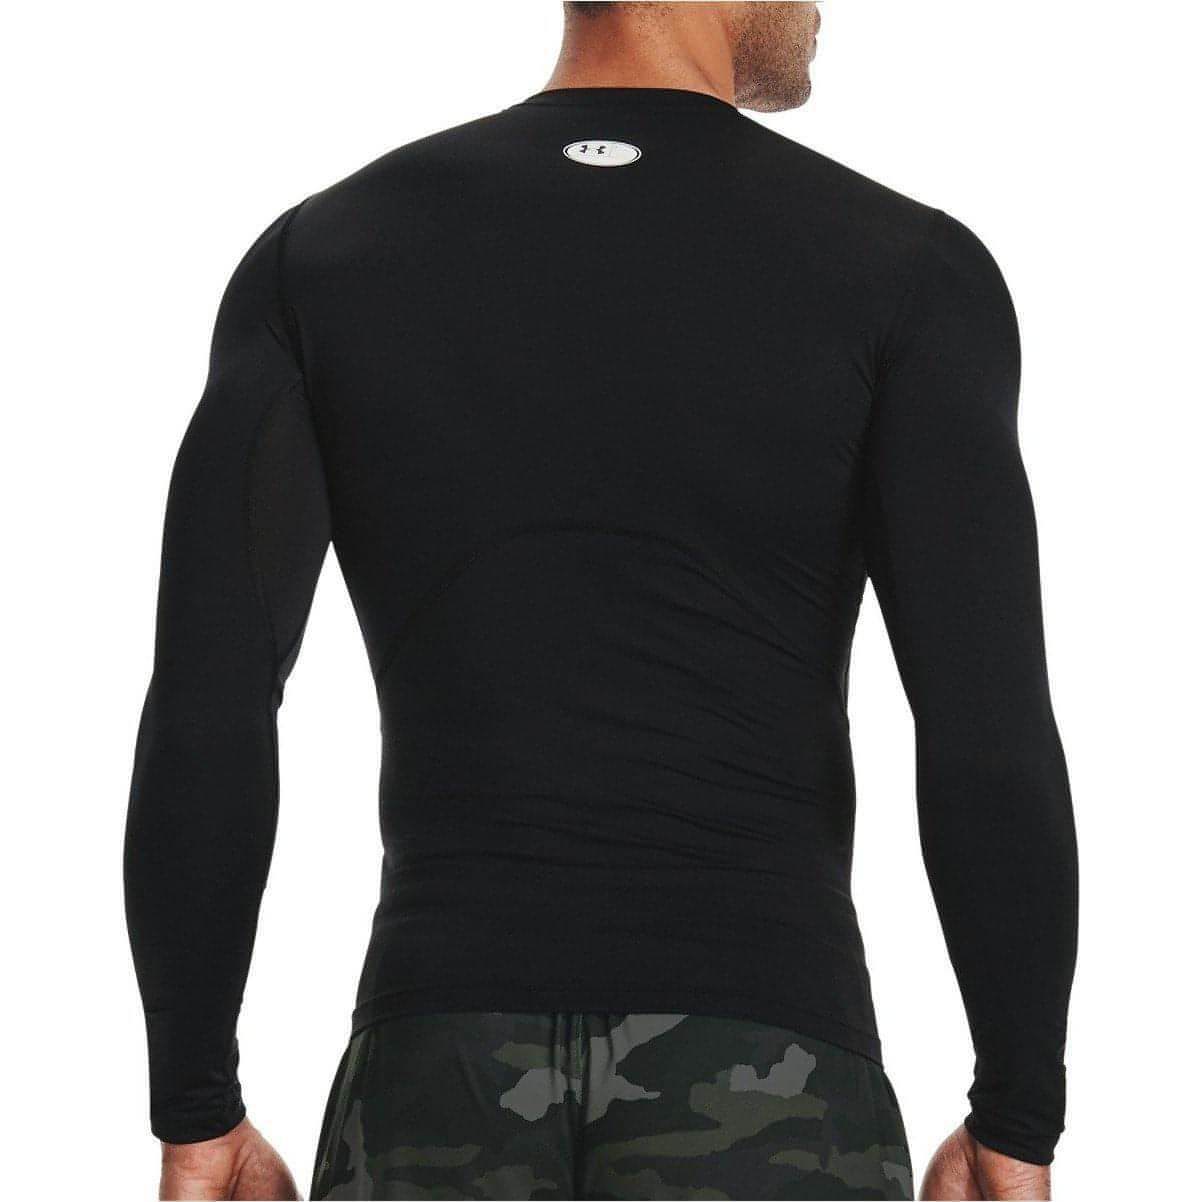 https://cdn.shopify.com/s/files/1/0564/9521/0704/products/under-armour-heatgear-armour-long-sleeve-mens-compression-top-black-28548153934032.jpg